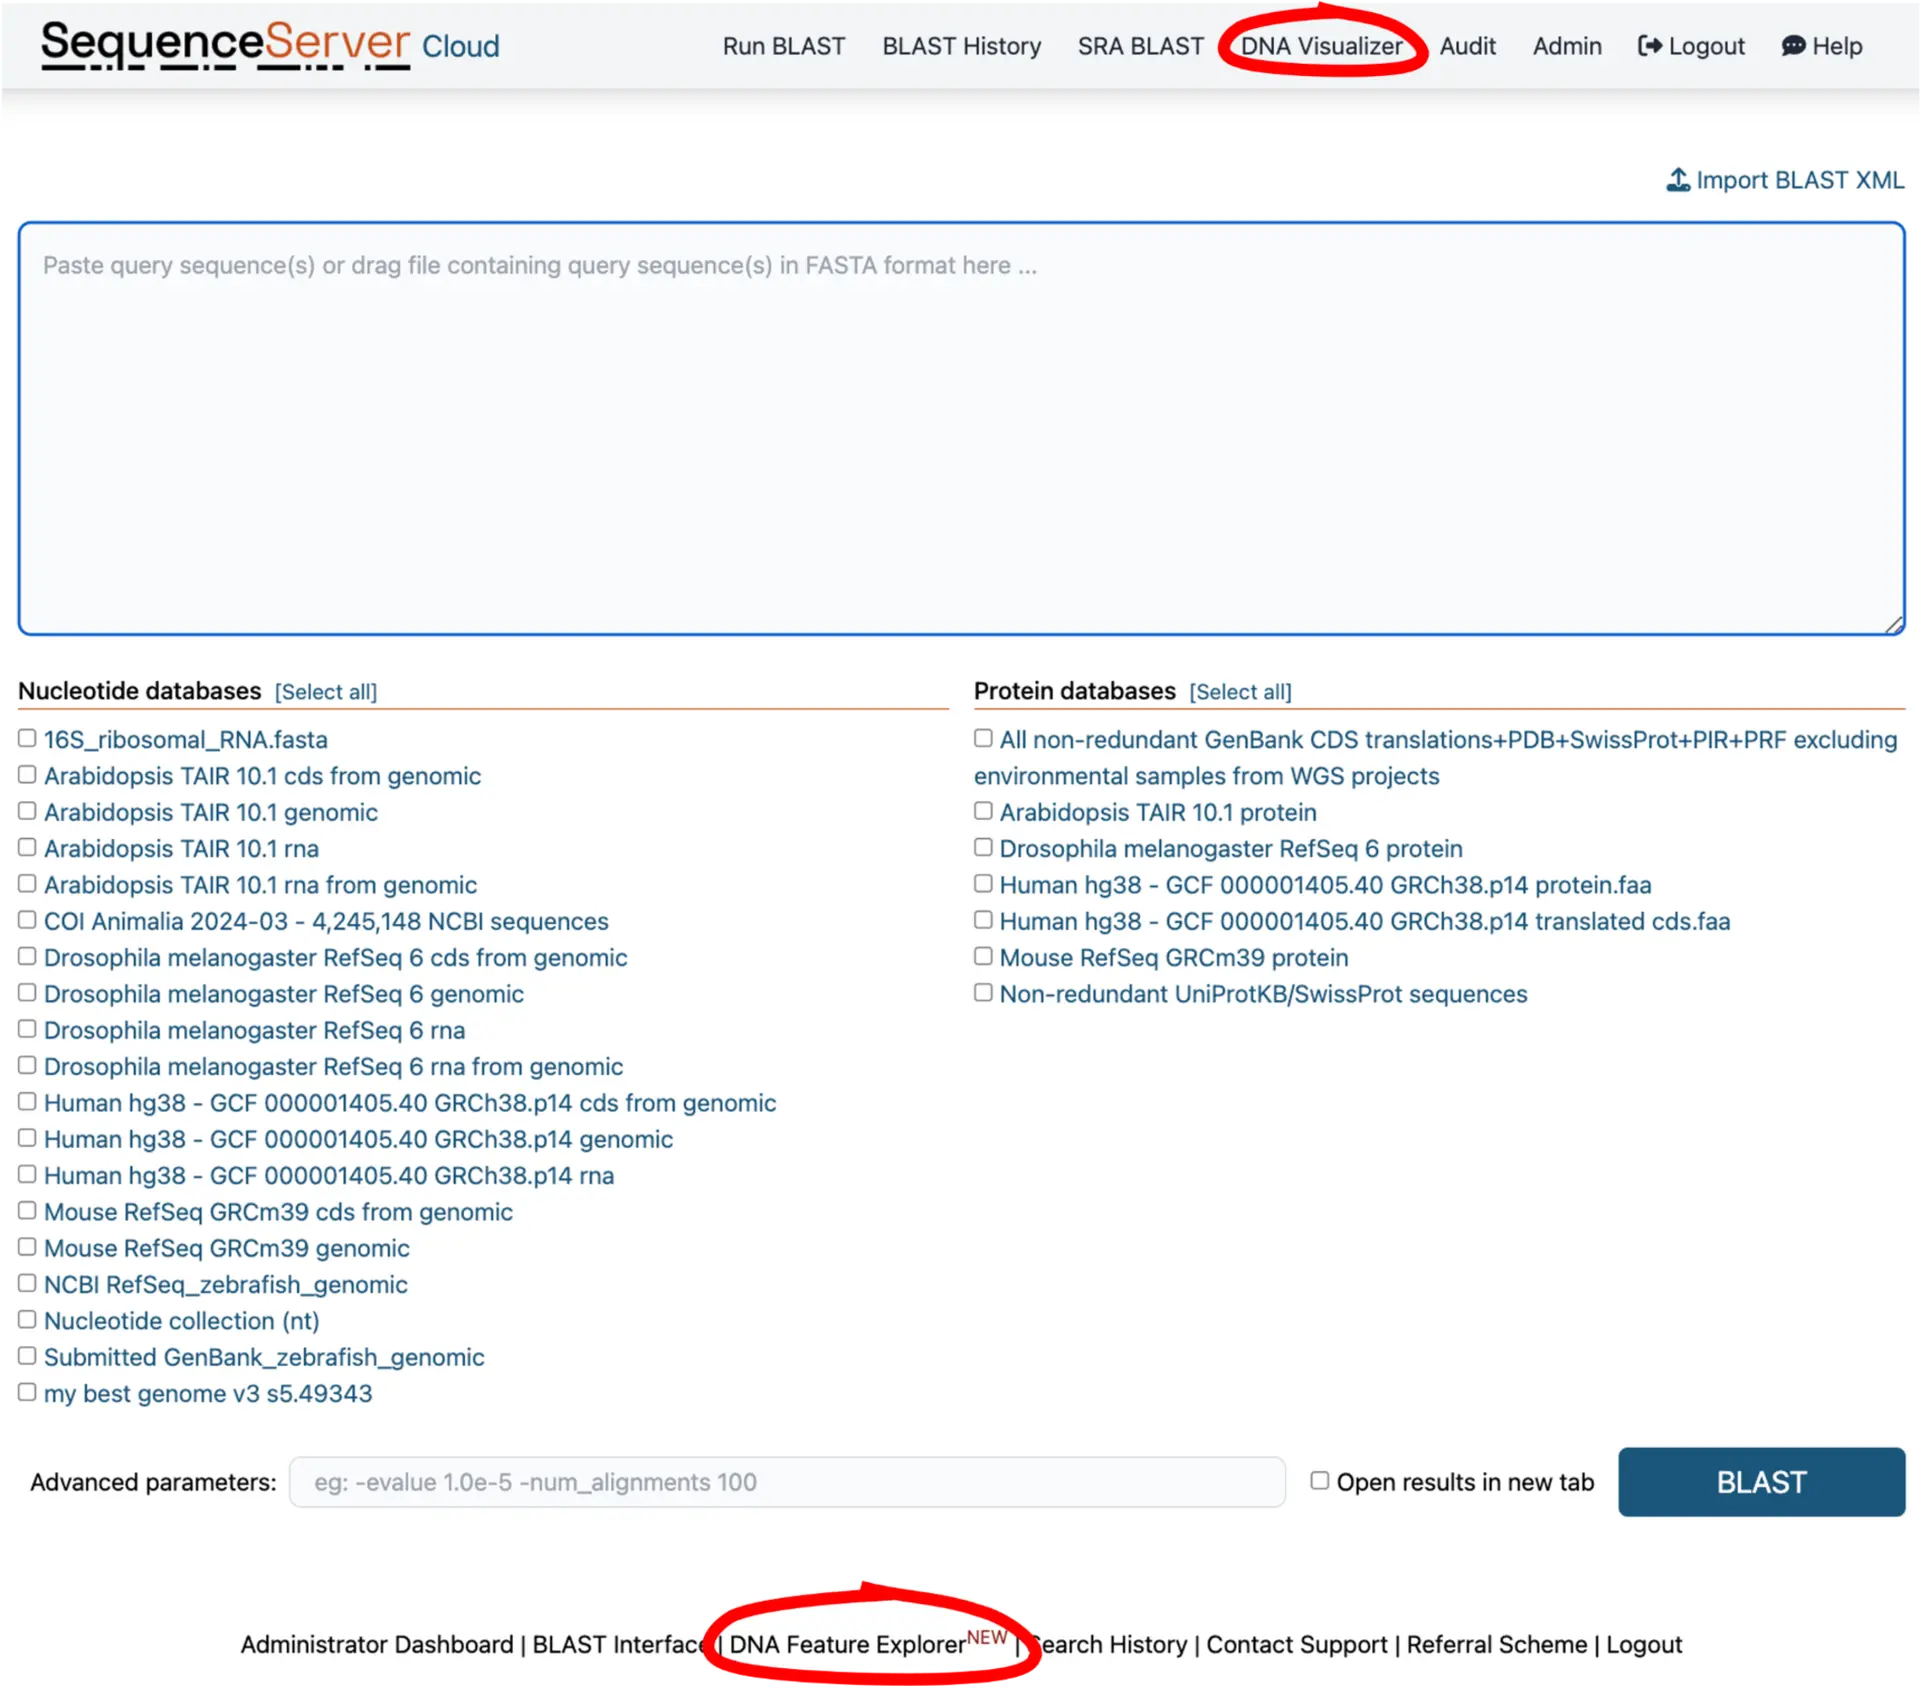 You can find the SequenceServer DNA Visualizer tool either in the top banner or down at the bottom of the web page.